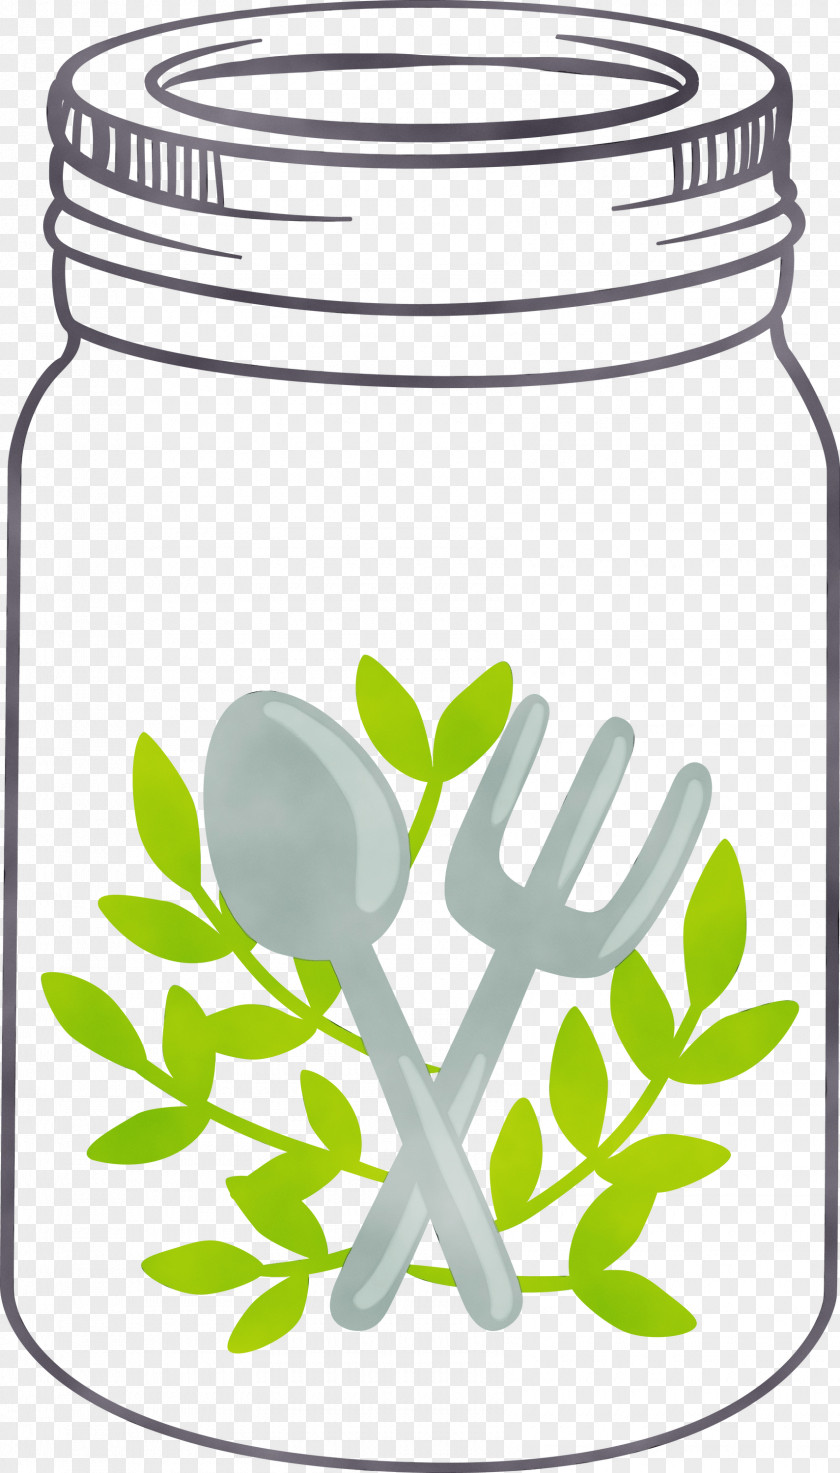 Line Art Food Storage Containers Leaf Green Tree PNG